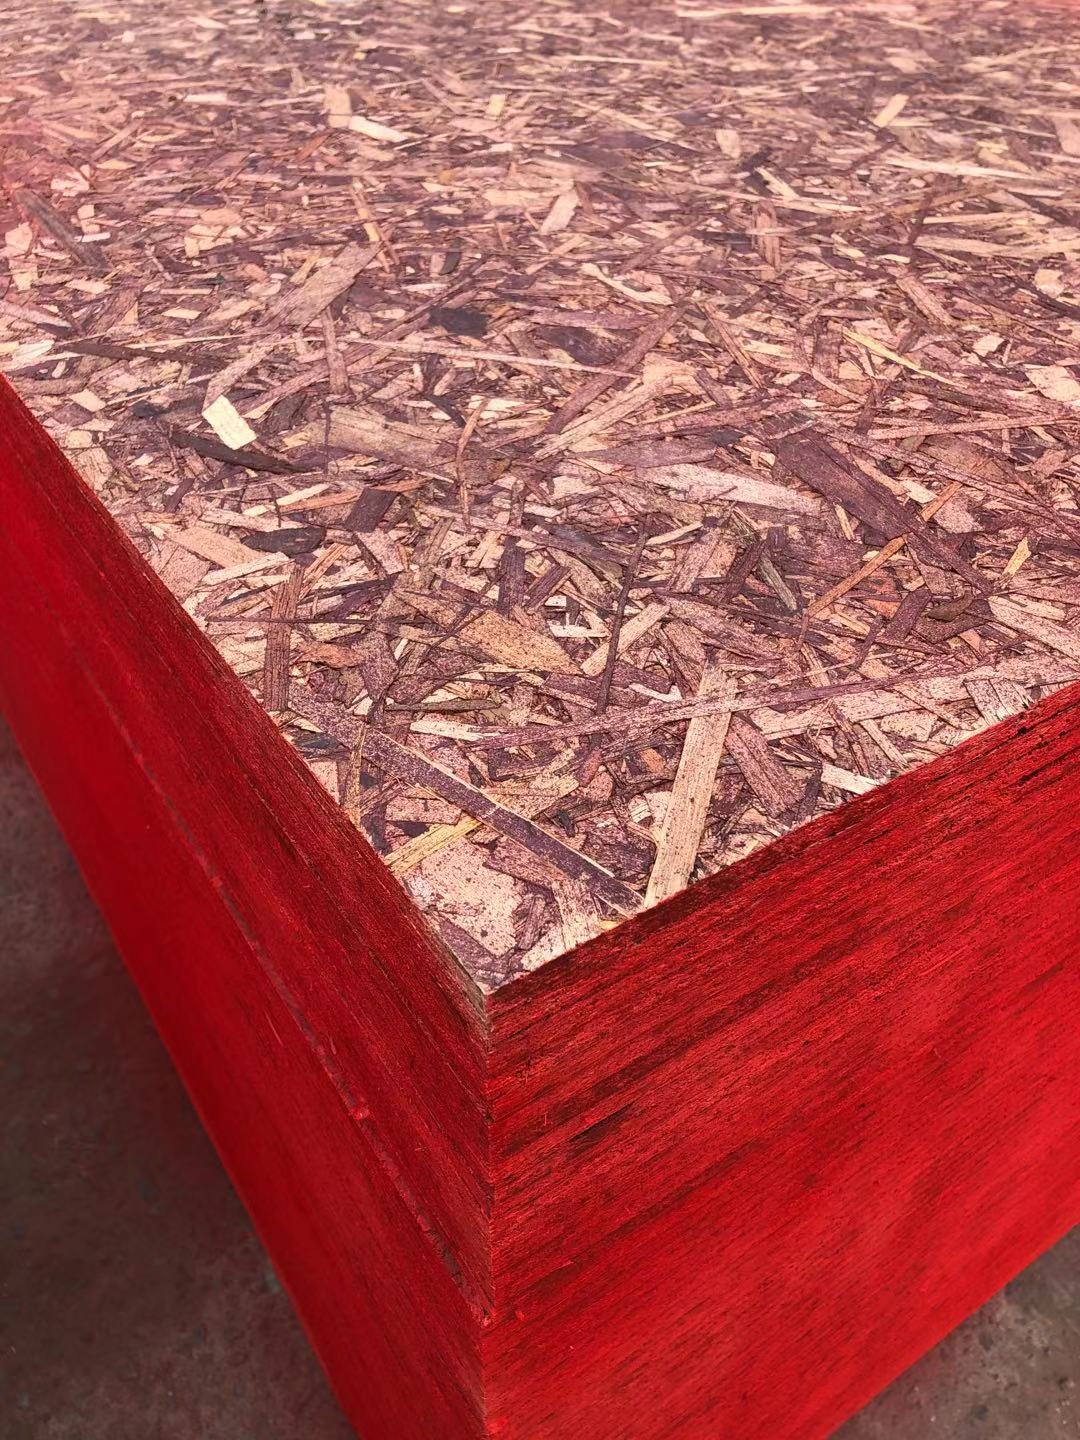 Waterproof OSB3 Oriented Strand Board Used for Construction (图4)